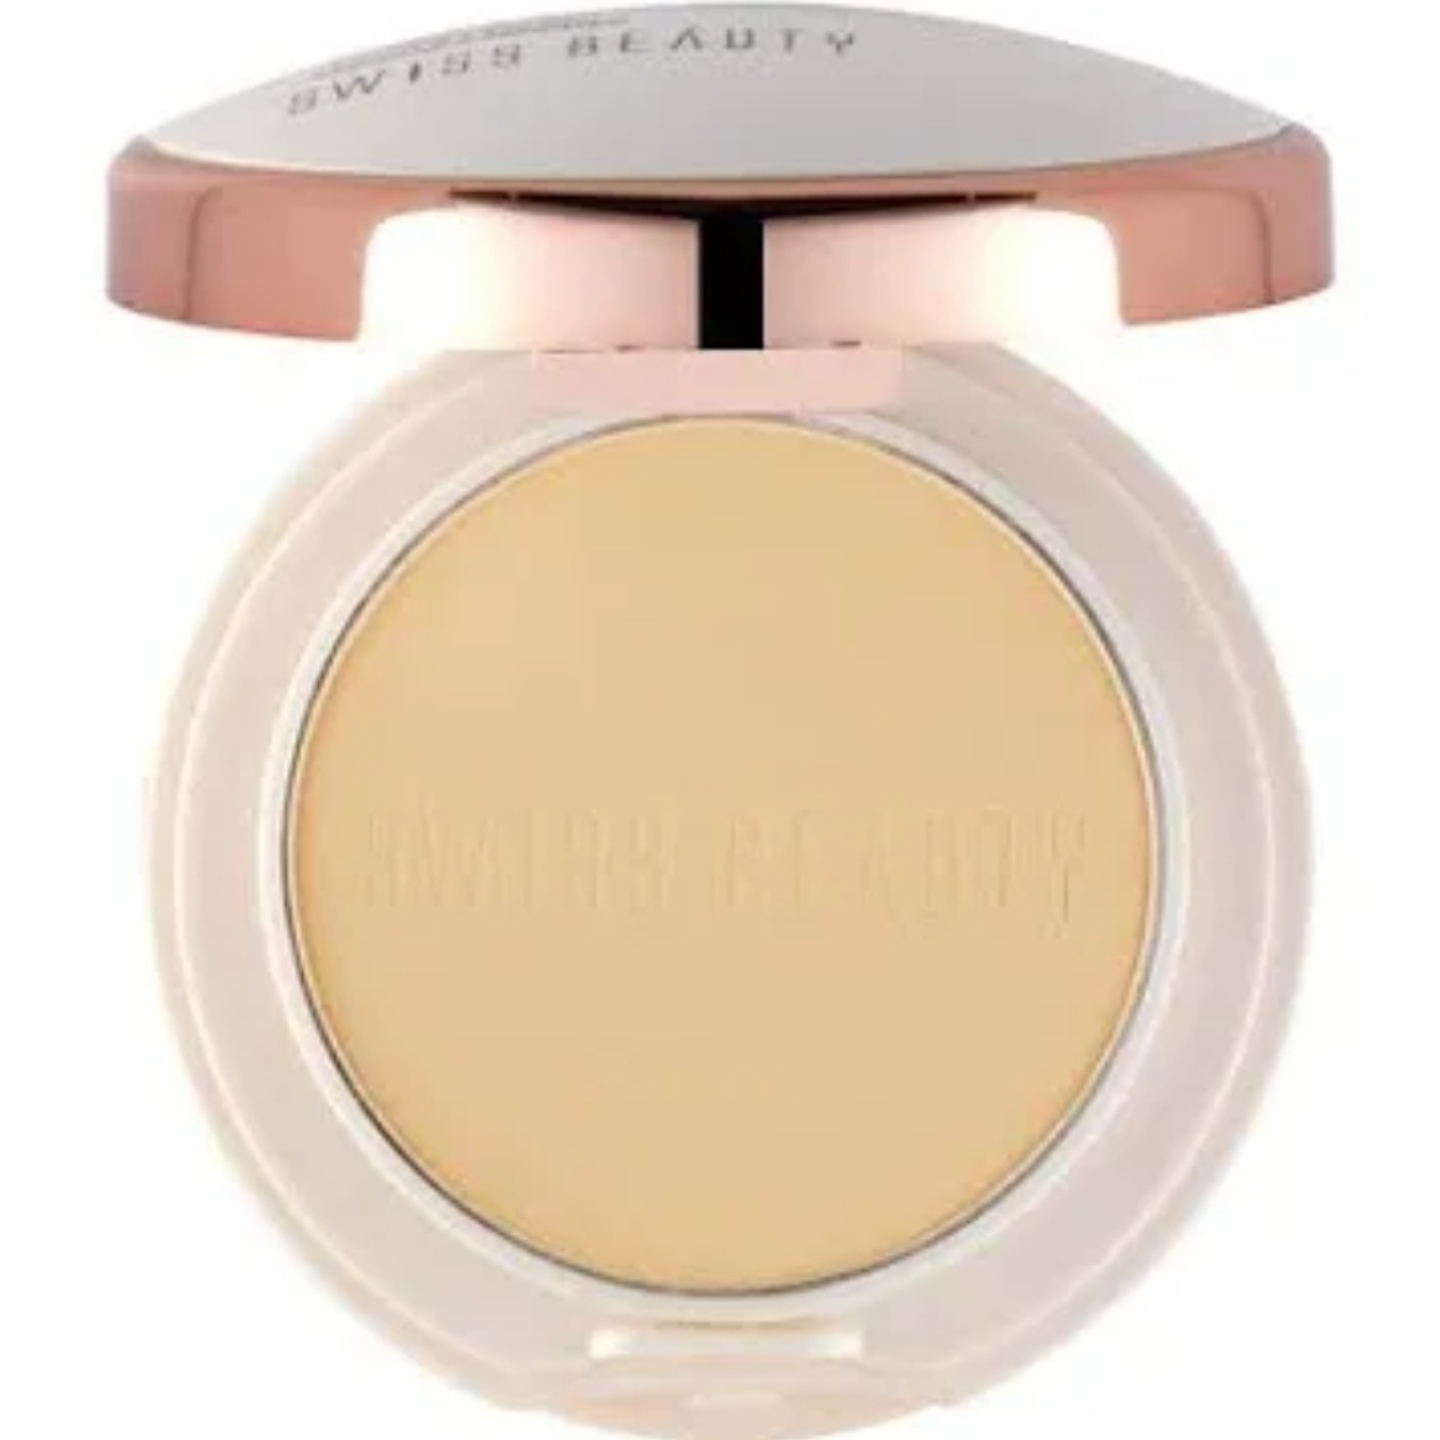 Swiss Beauty 2-in-1 oil-control Compact Powder